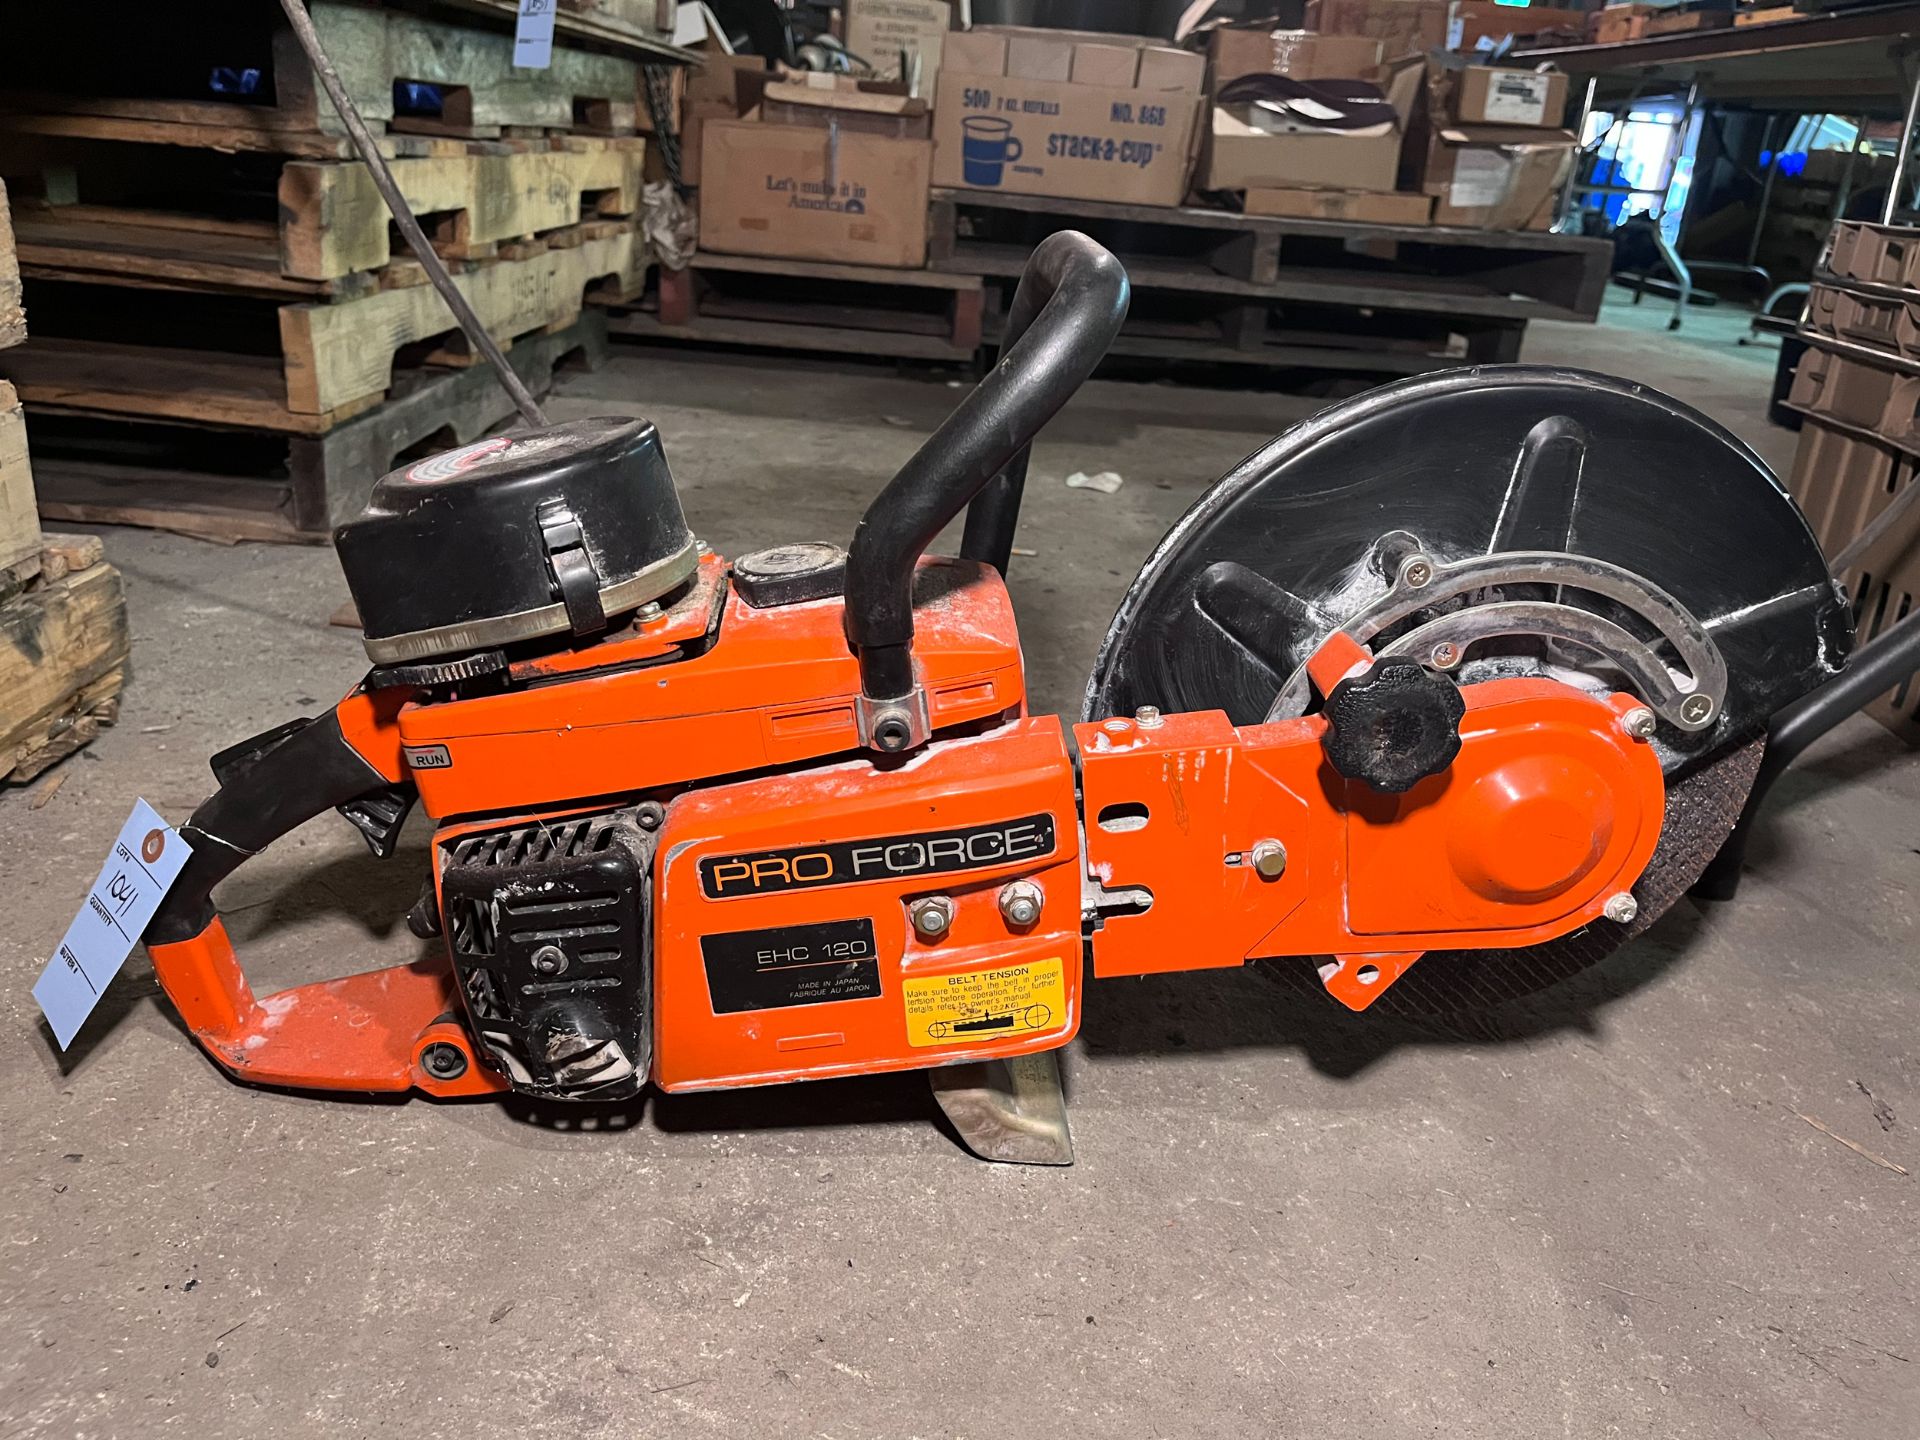 Pro Forge EHC 120 Gas Powered Concrete Saw - Image 2 of 2